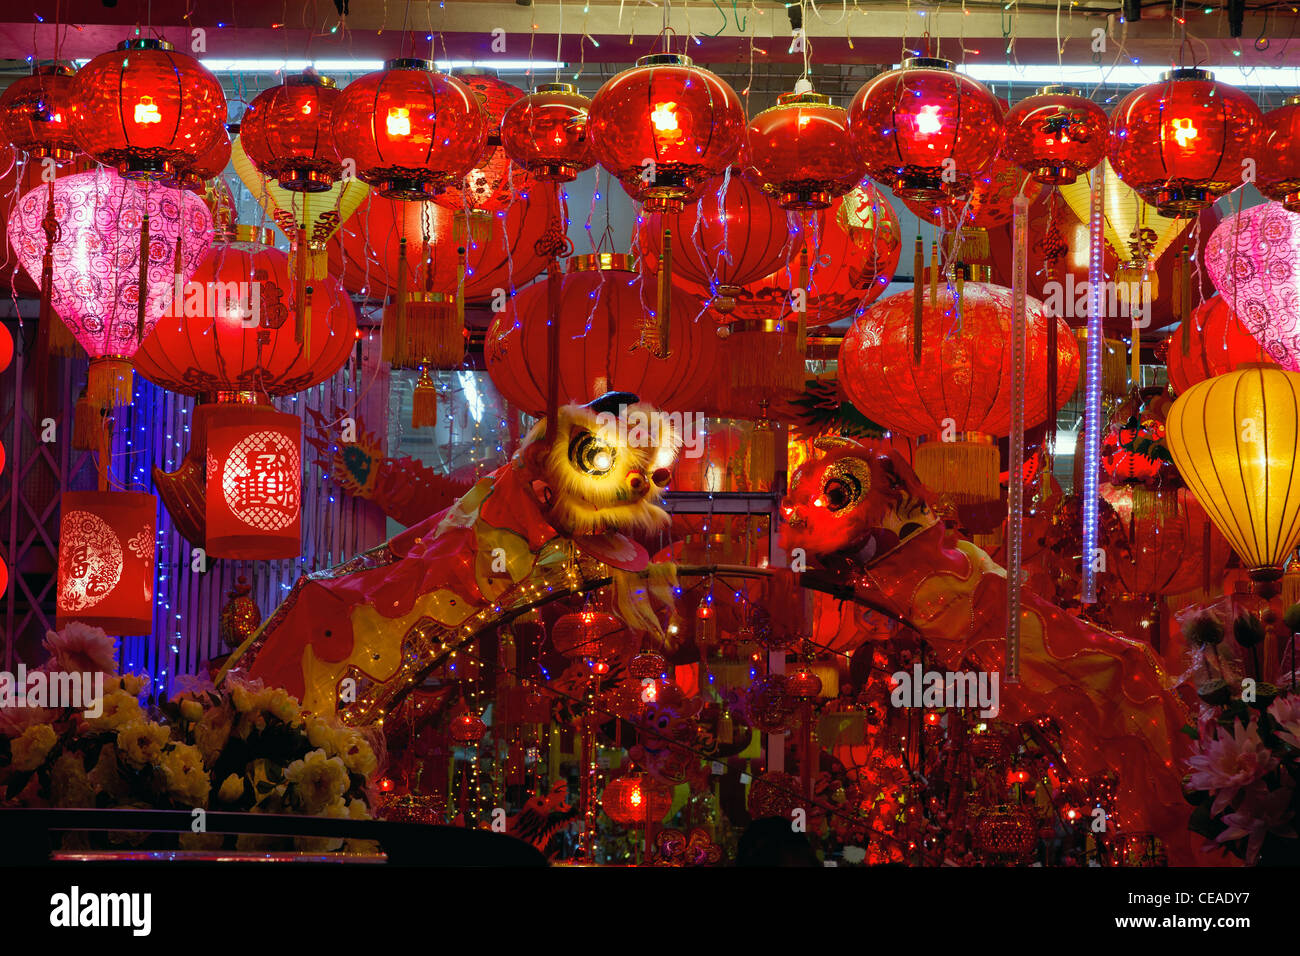 Storefront Displays of Chinese New Year Lanterns and Lion Dance along Street in Chinatown Stock Photo